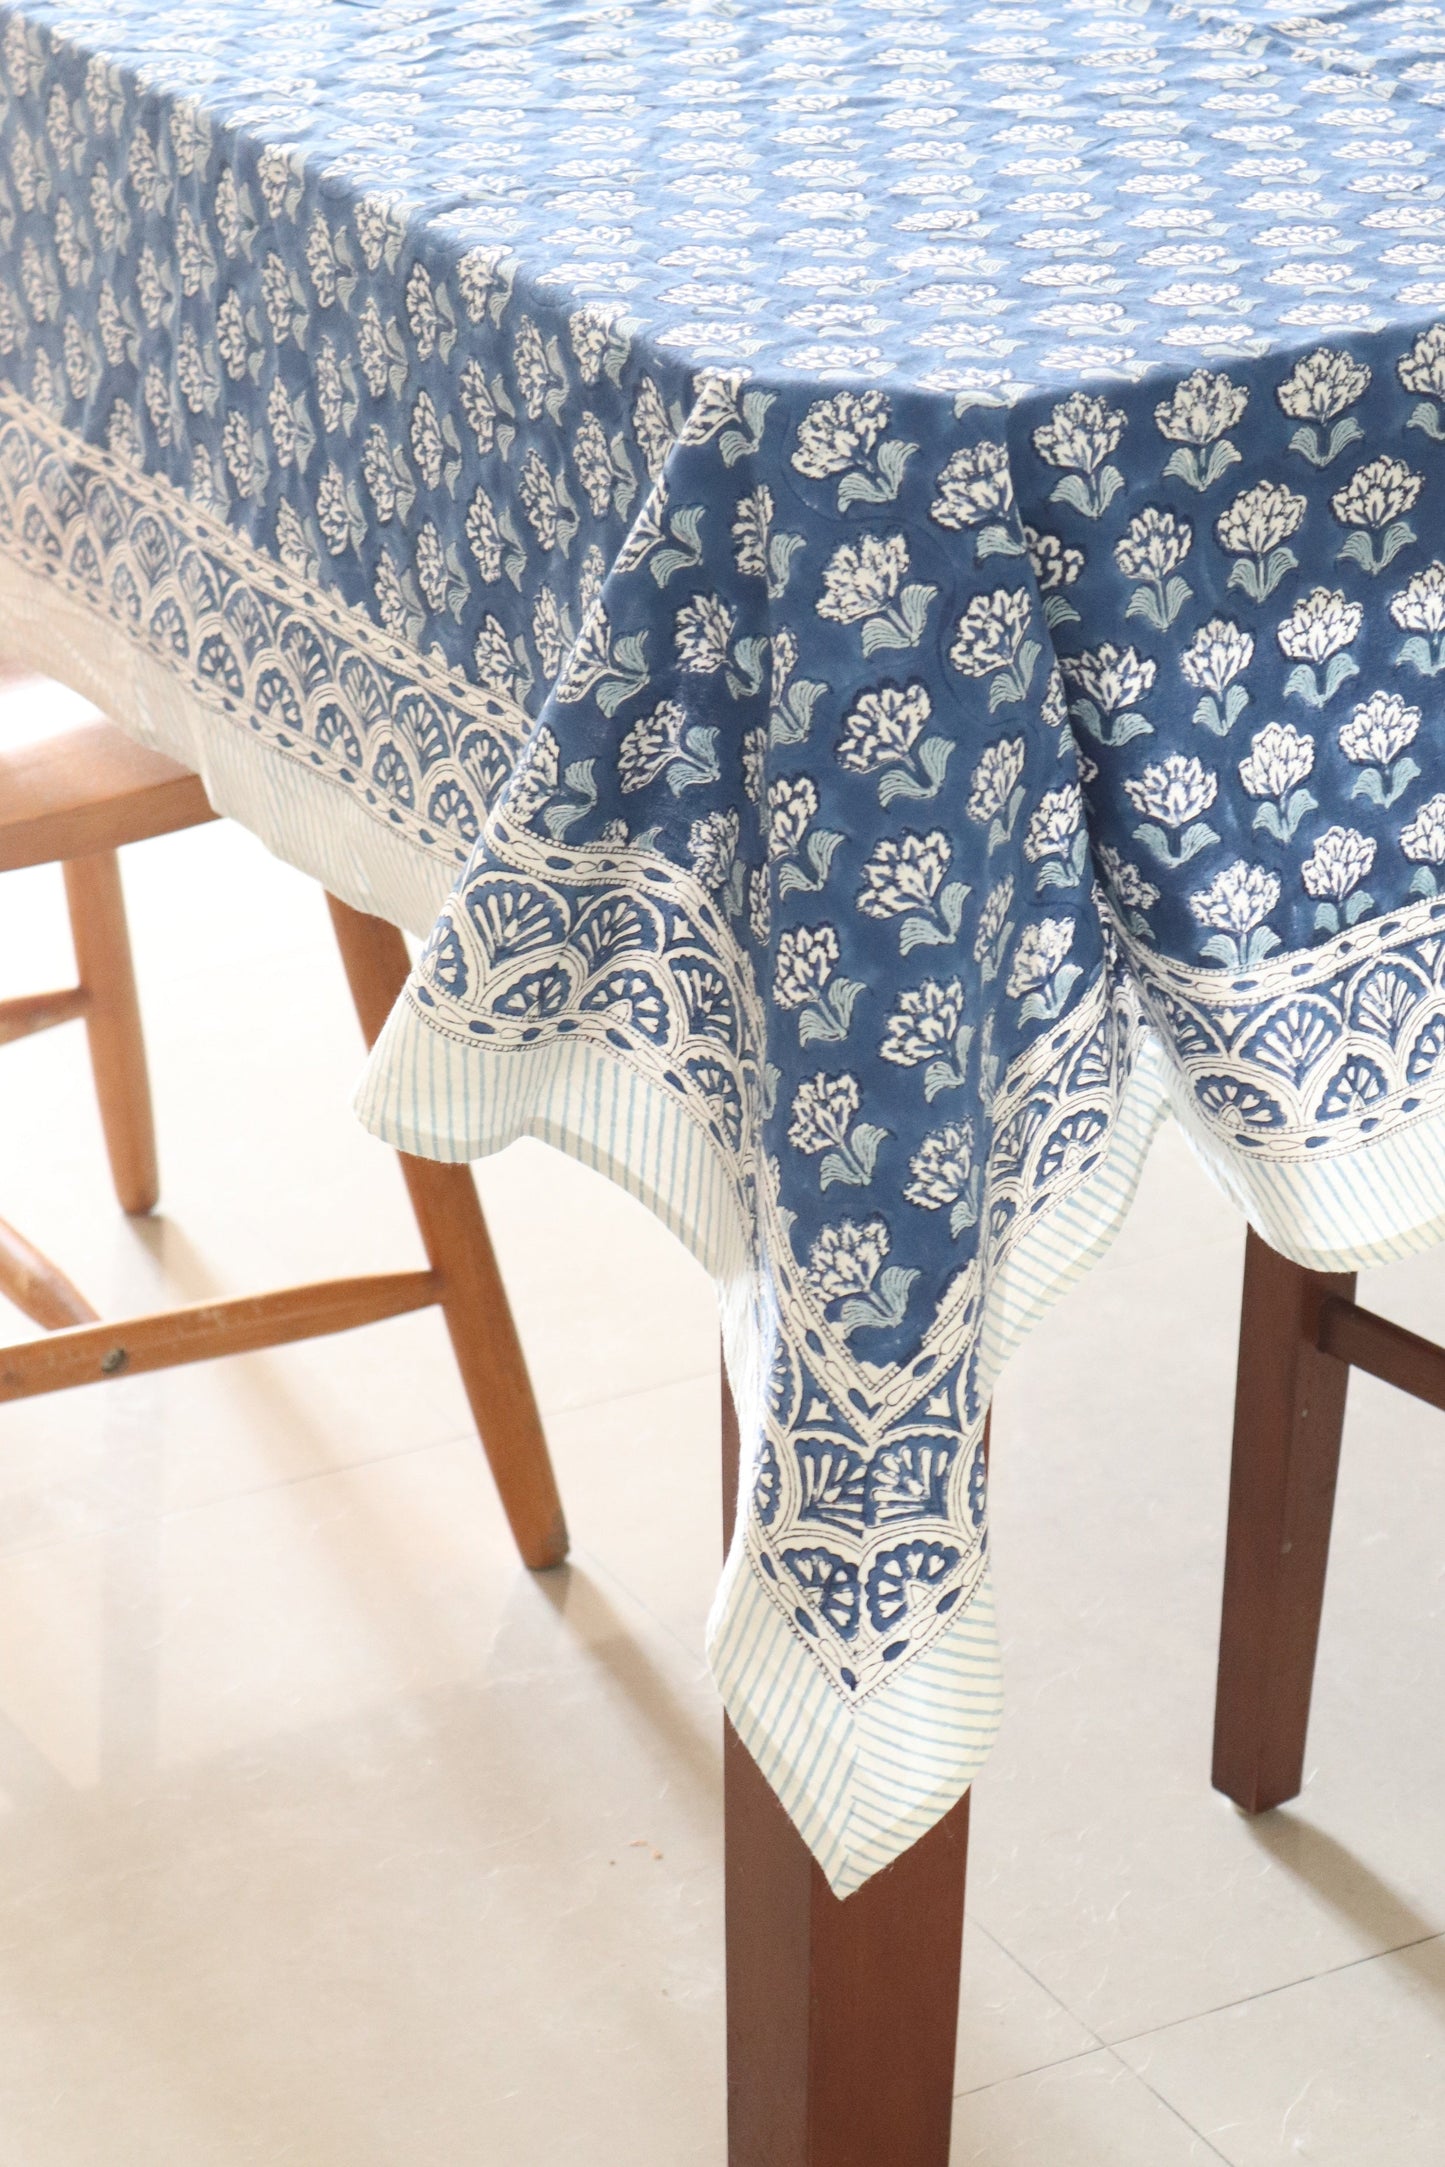 Blue boota tablecloth - 6 to 8 seater block print table cloth - Navy blue table cover - large table size tablecloth - 60x100 inches